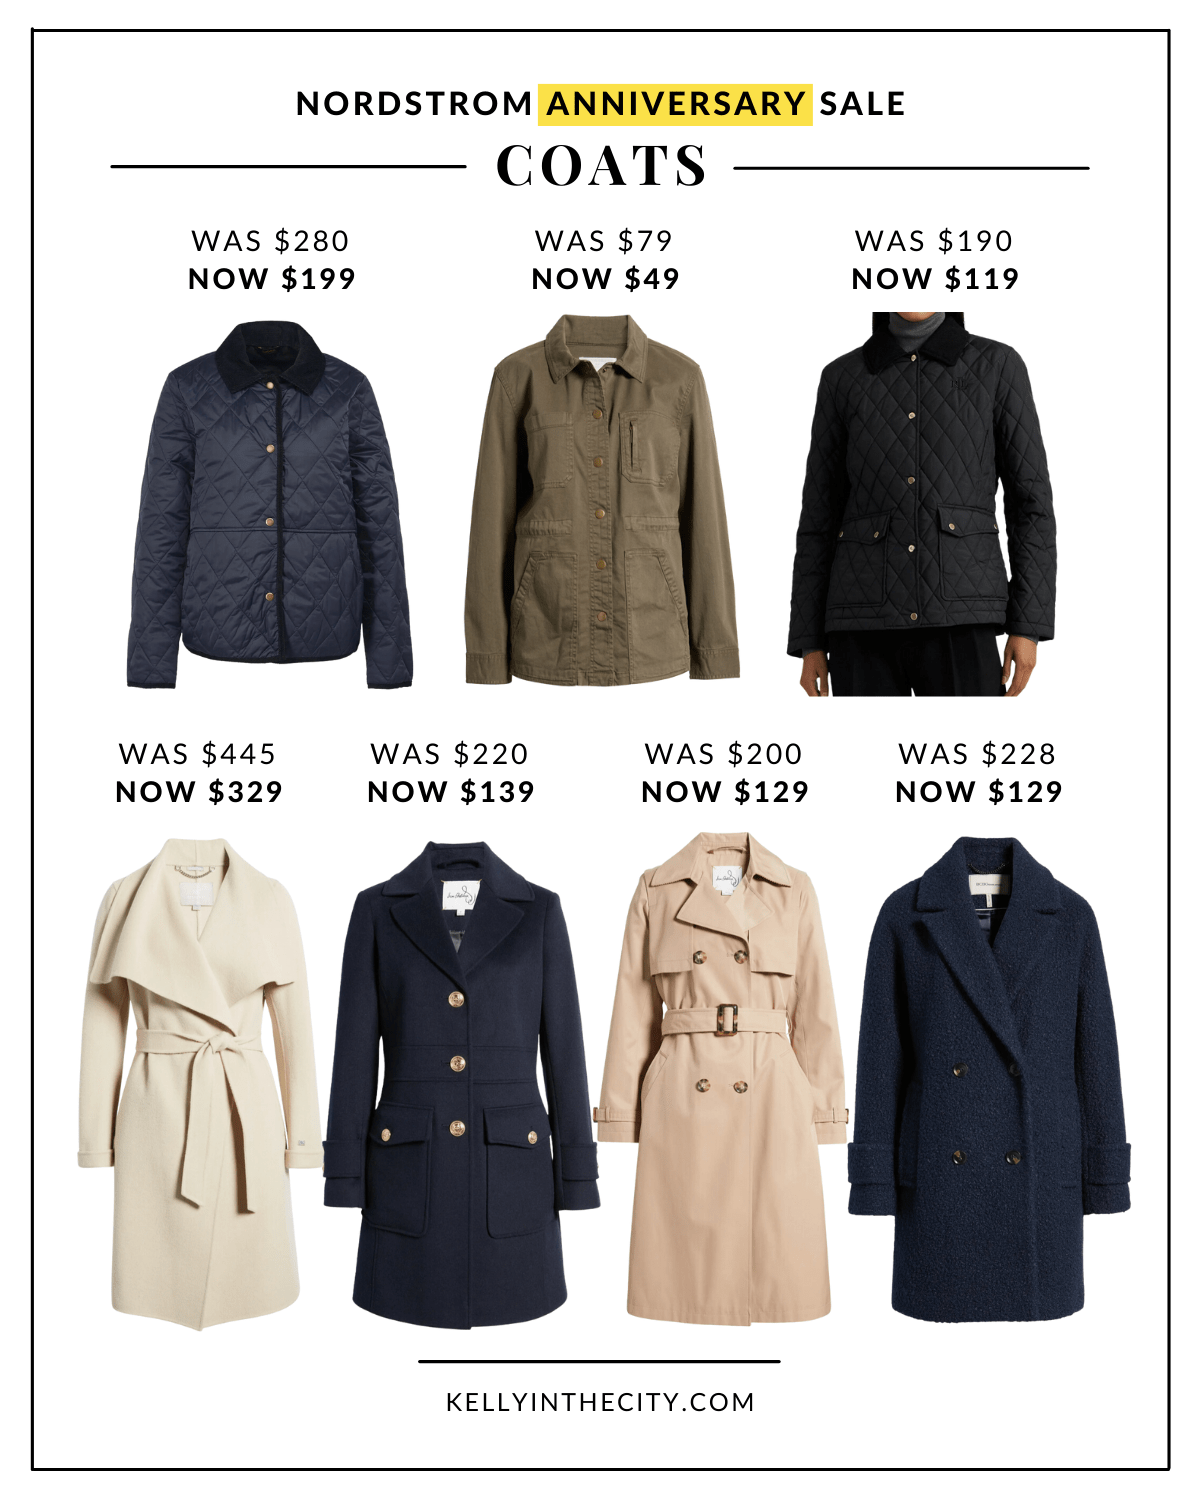 2023 Nordstrom Anniversary Sale Coats and Jackets